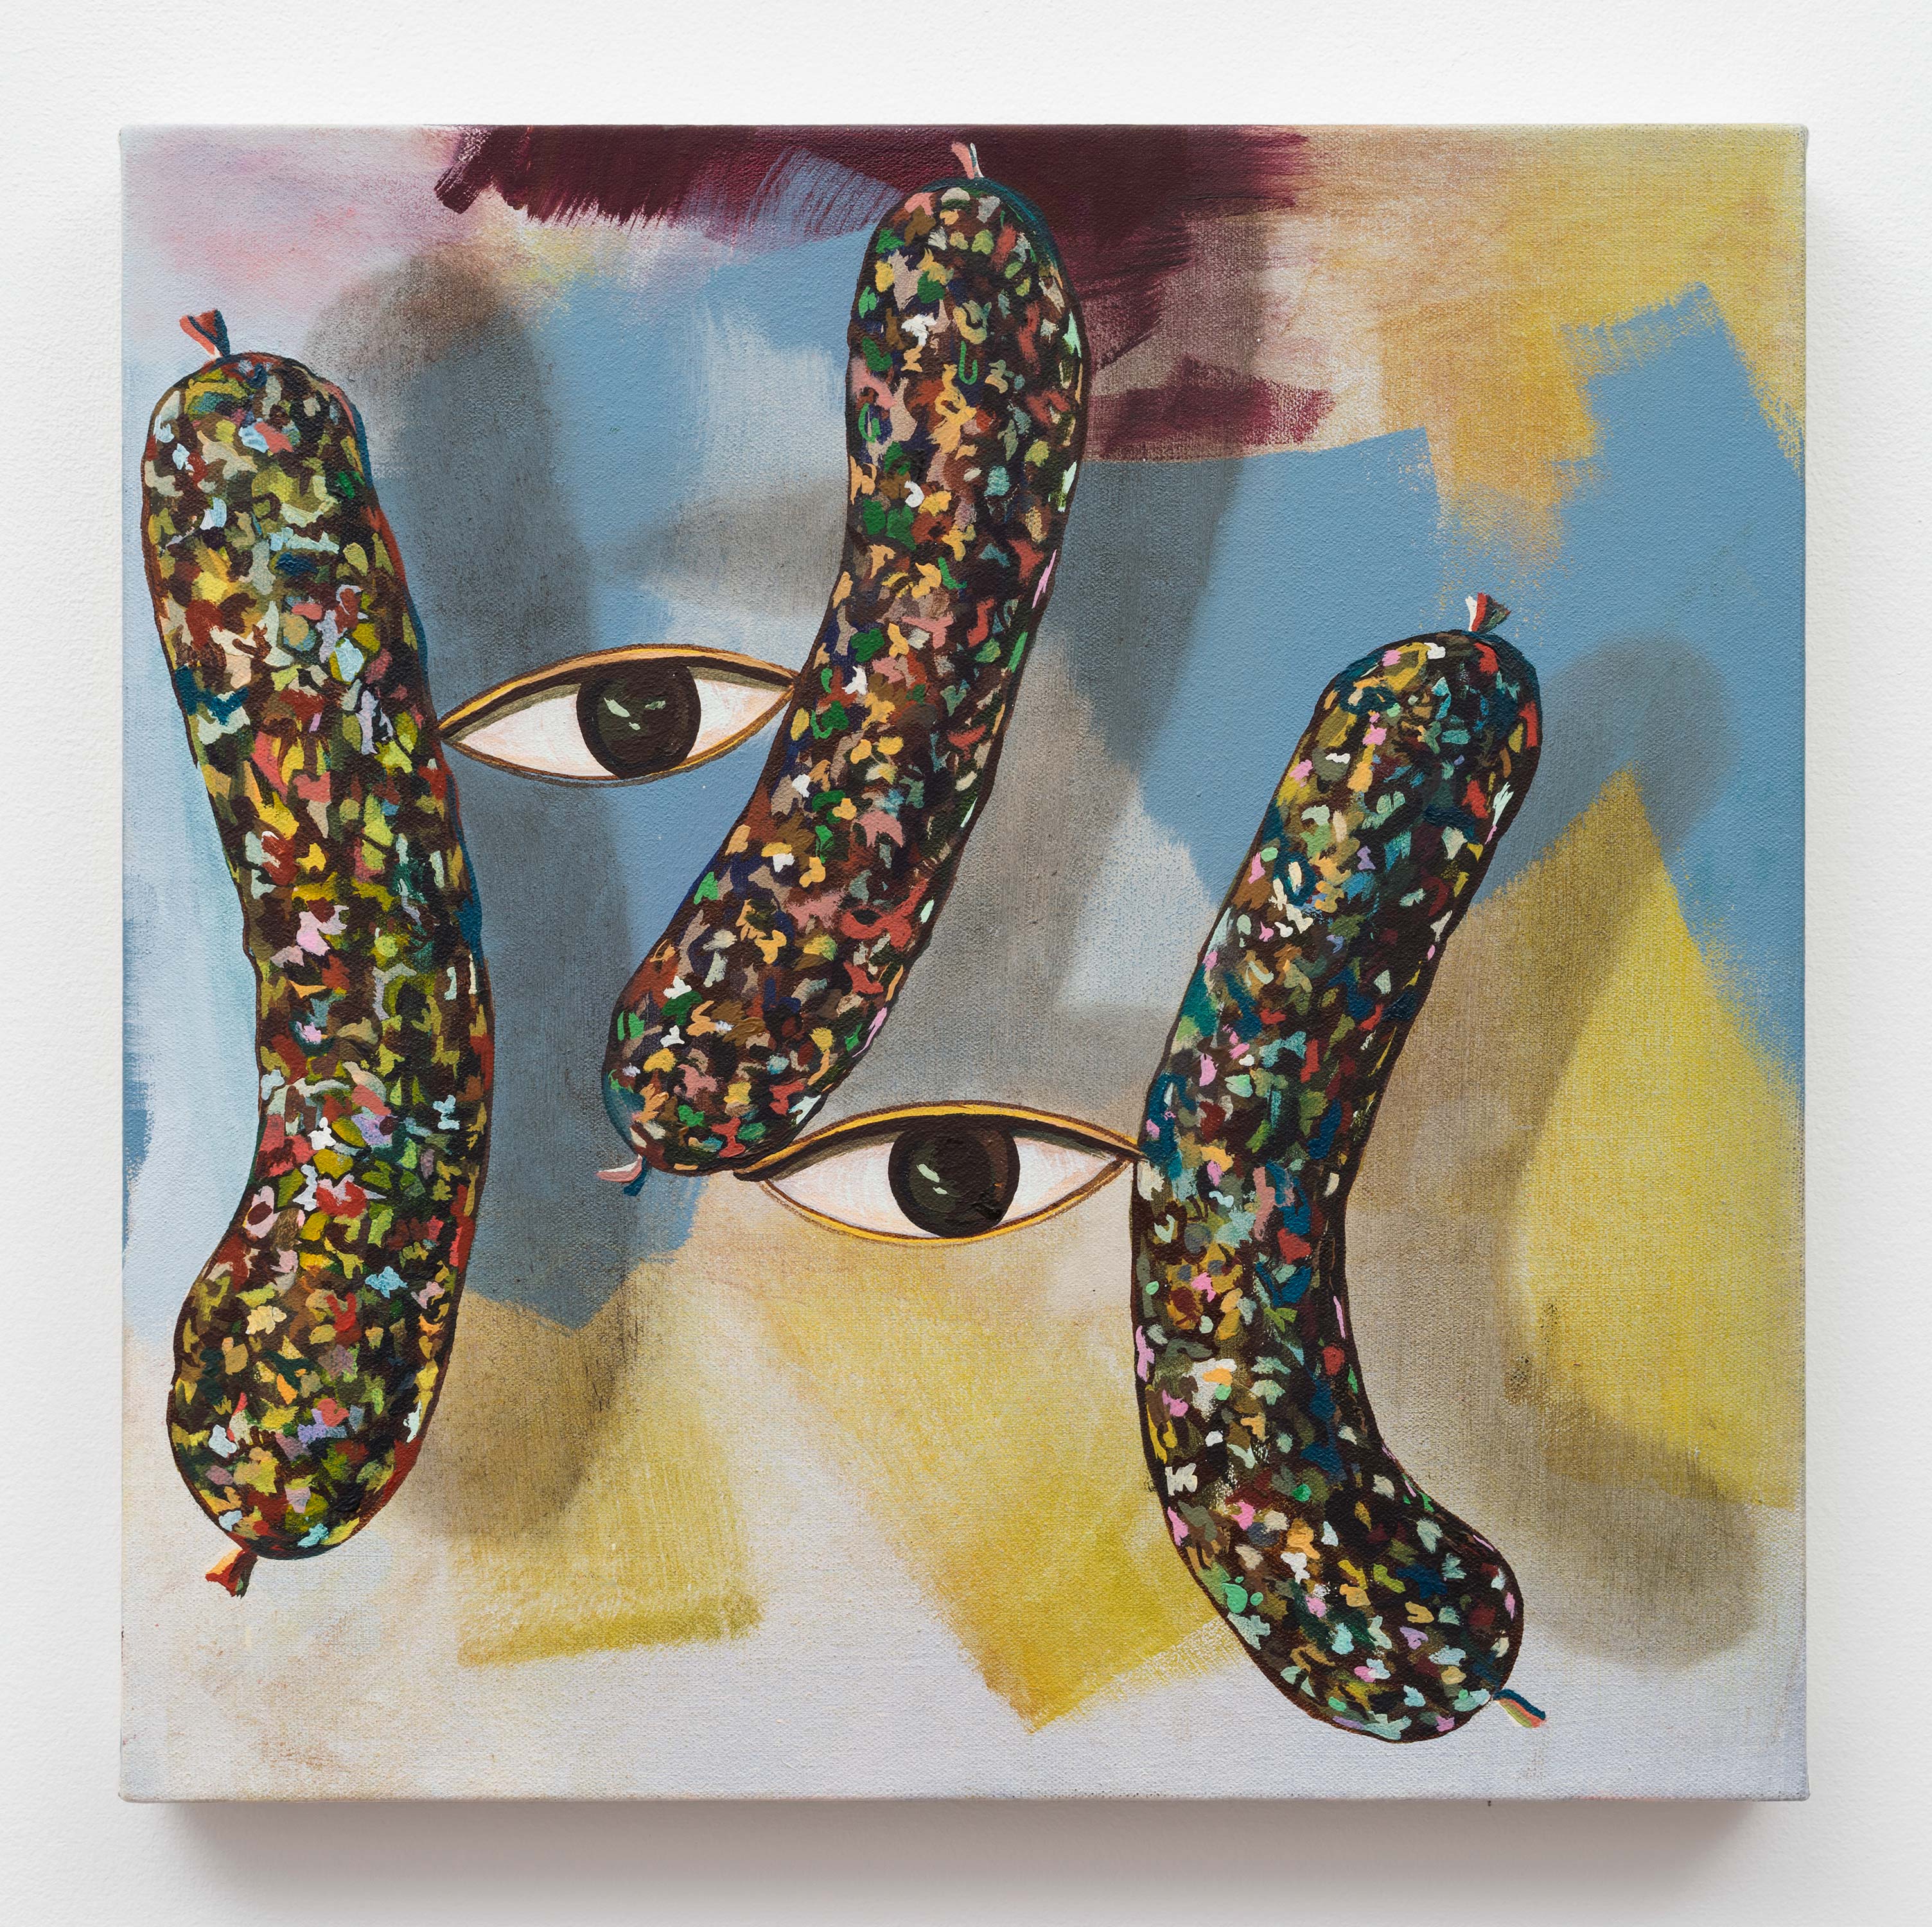 Paul Branca<br>Untitled, Sausage-yes<br>2015<br>Oil on canvas<br>15 x 15 inches (38.1 x 38.1 cm)